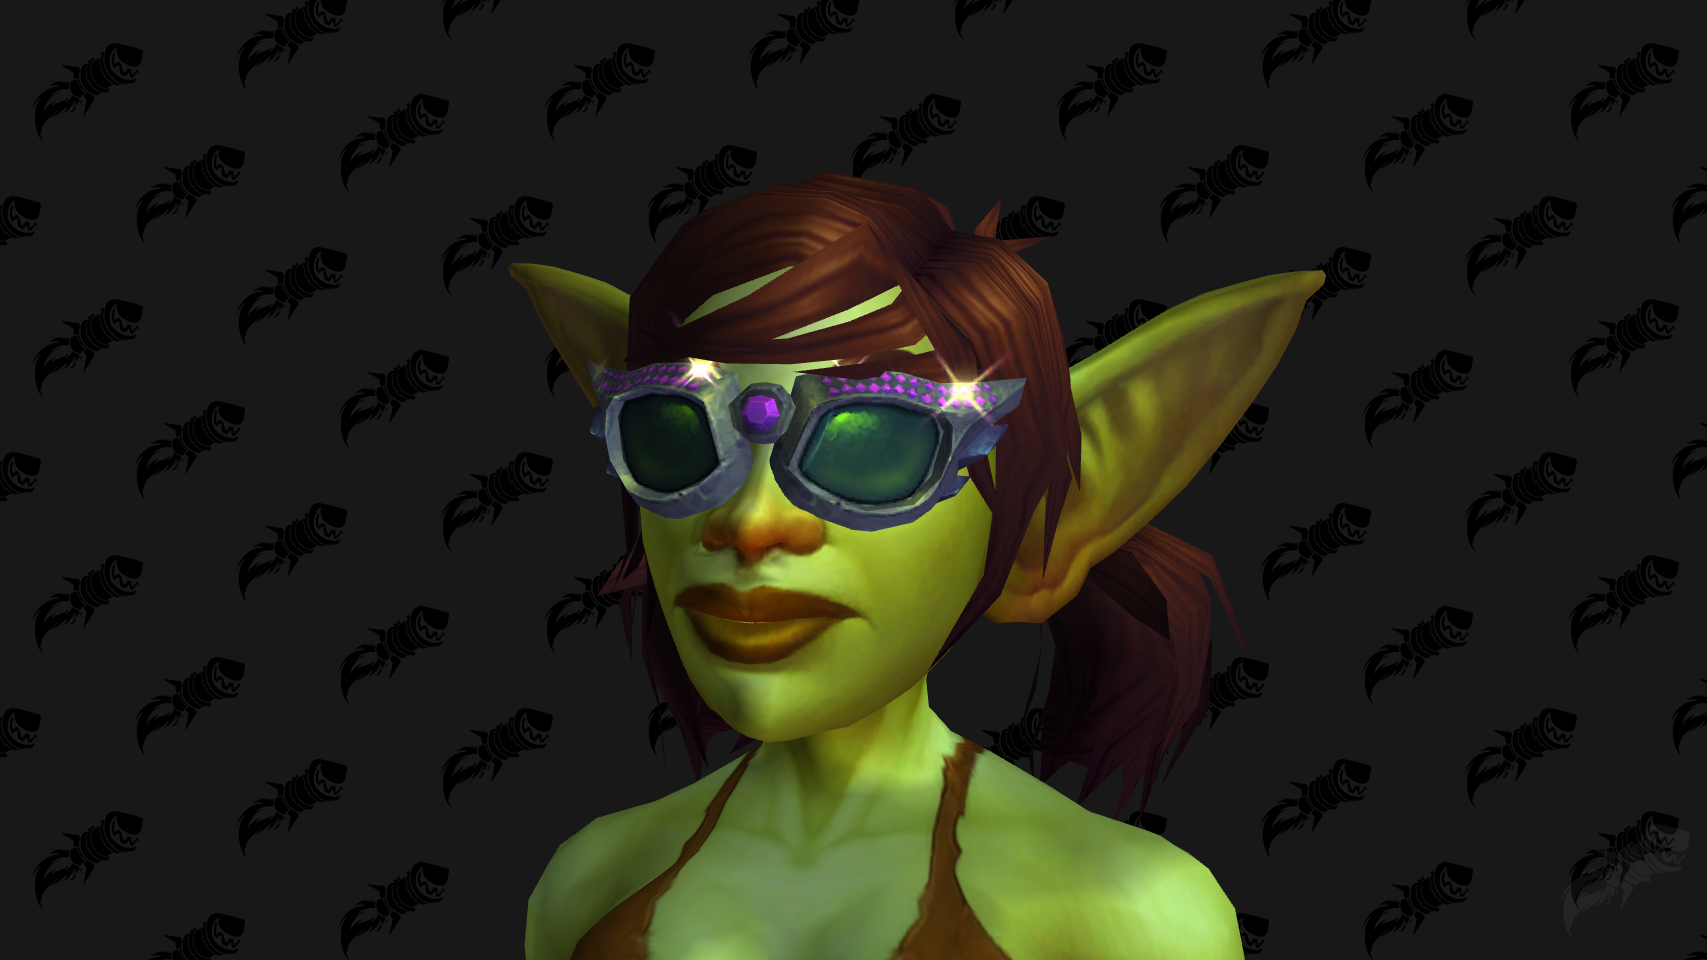 Top Hats, and Year-Round Holiday Transmog? Cosmetics in 10.0.5 Wowhead News